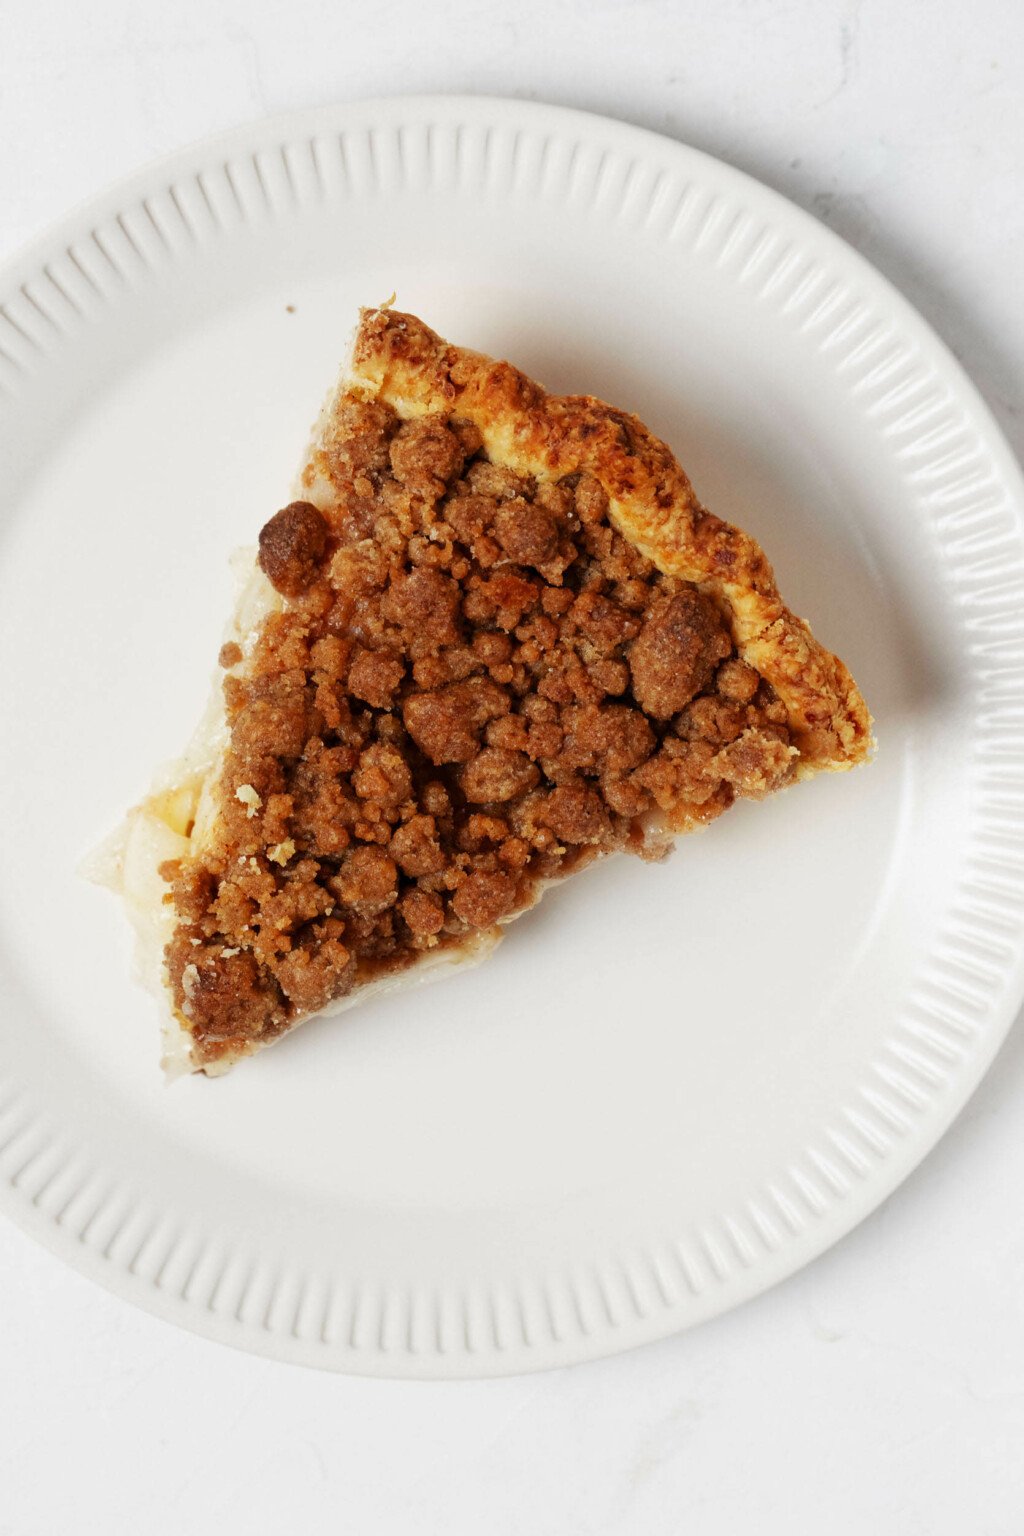 An overhead image of a slice of vegan crumb pie, which is plated on a small, white ceramic plate.